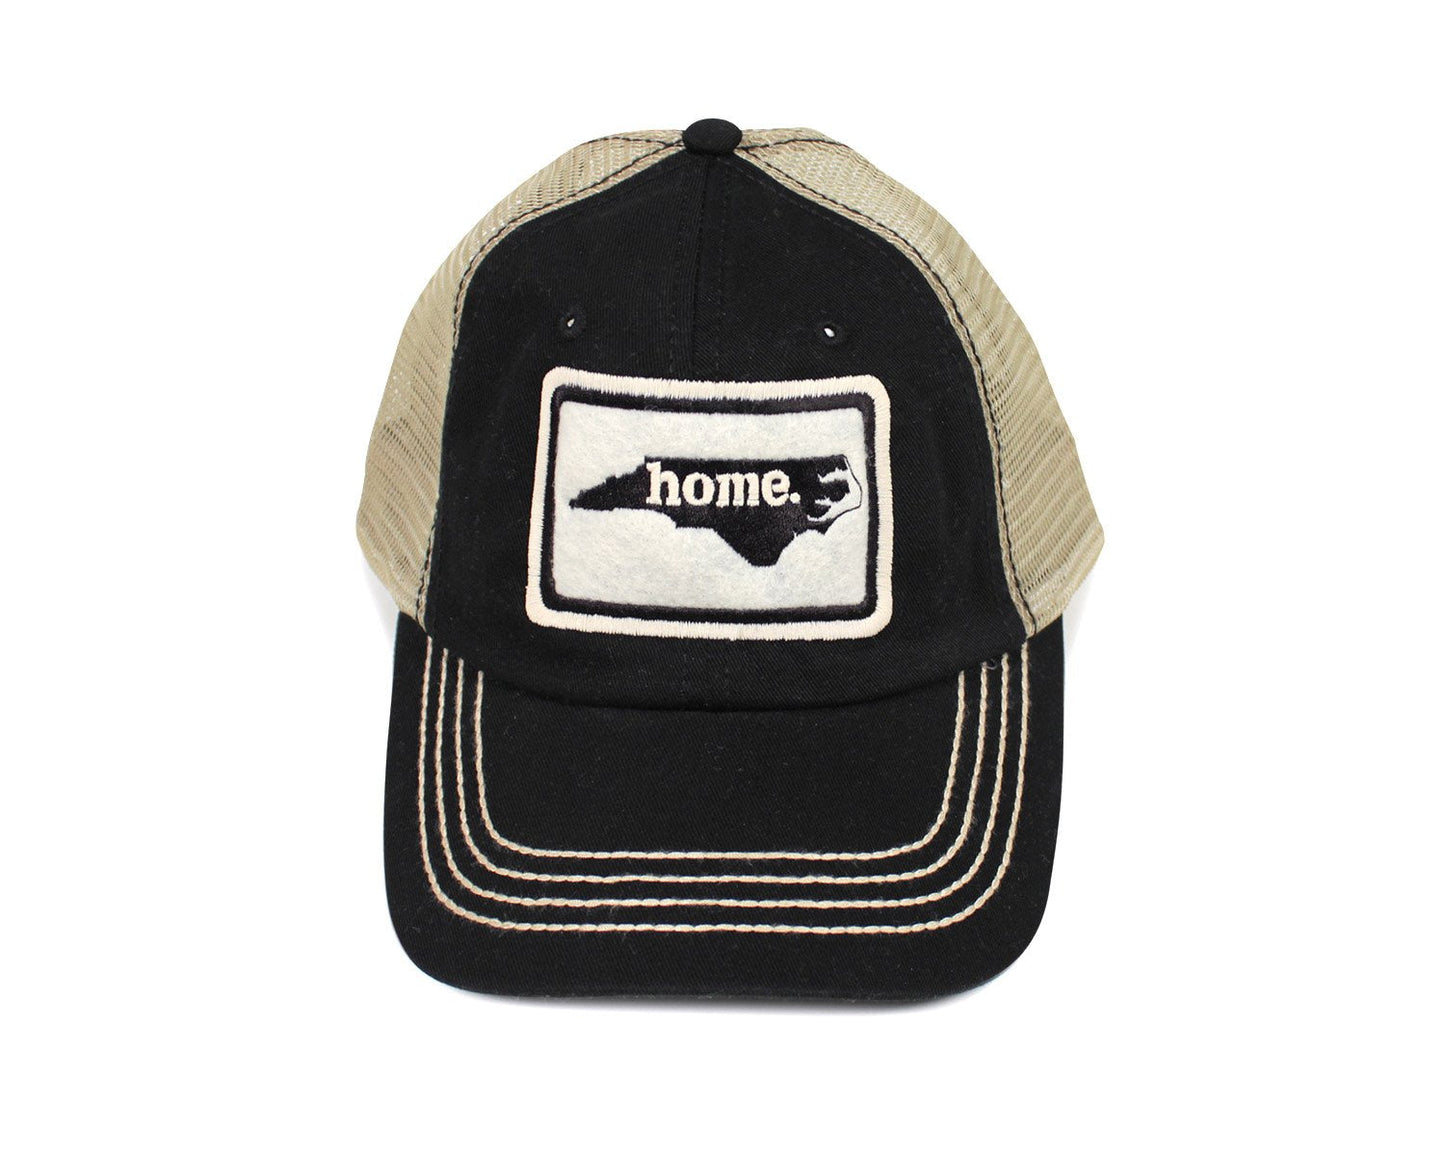 home. Mesh Hat - Tennessee